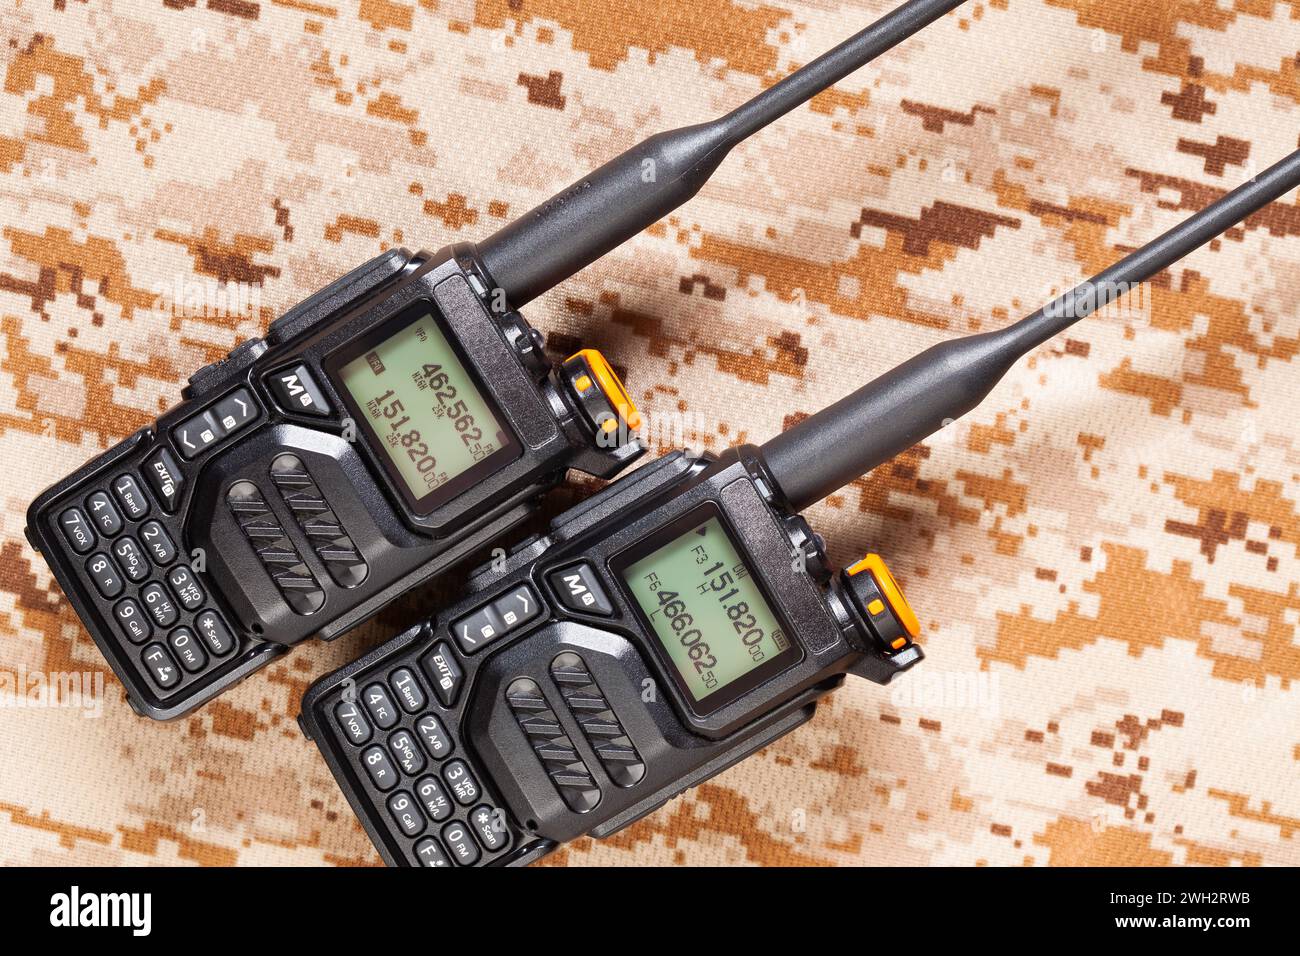 Pair of VHF UHF two-way radios on green camouflage background Stock Photo